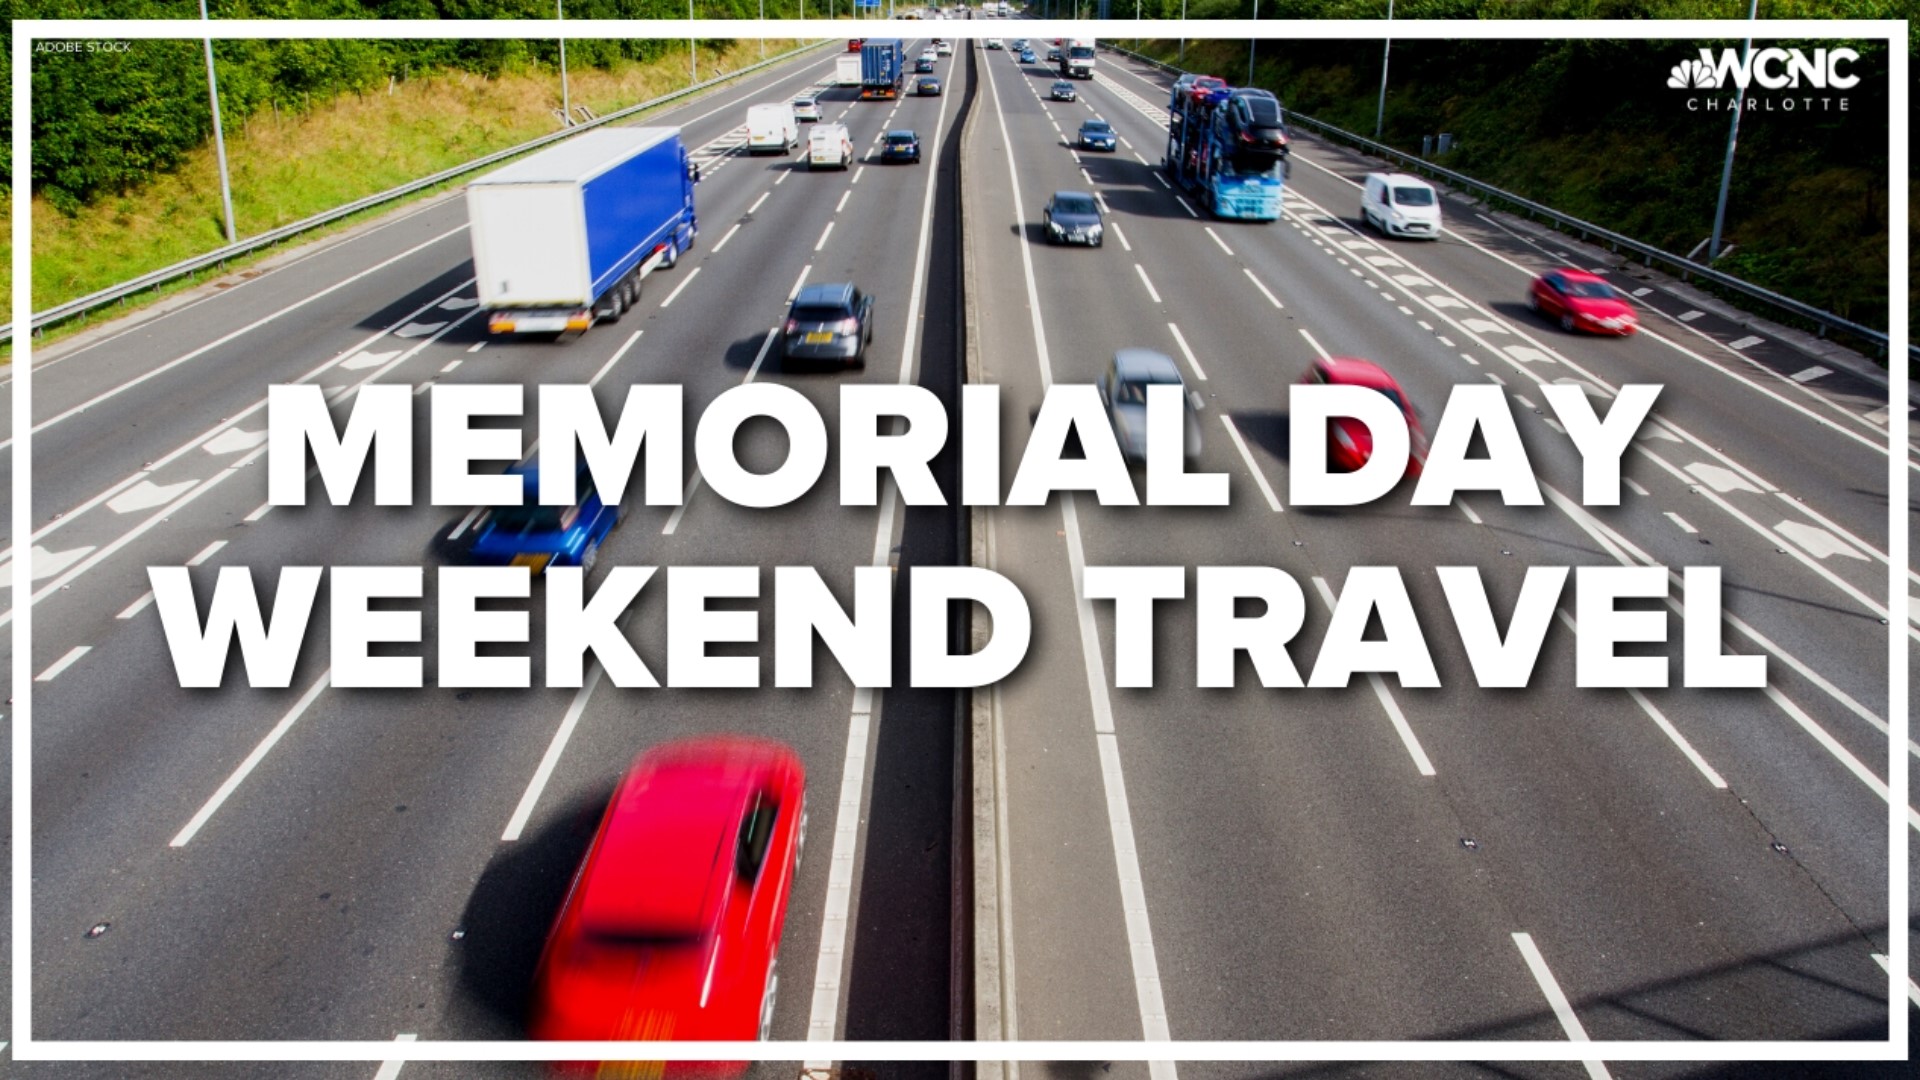 AAA predicts over 1 million North Carolinians will hit the road for Memorial Day despite record gas prices across the country.